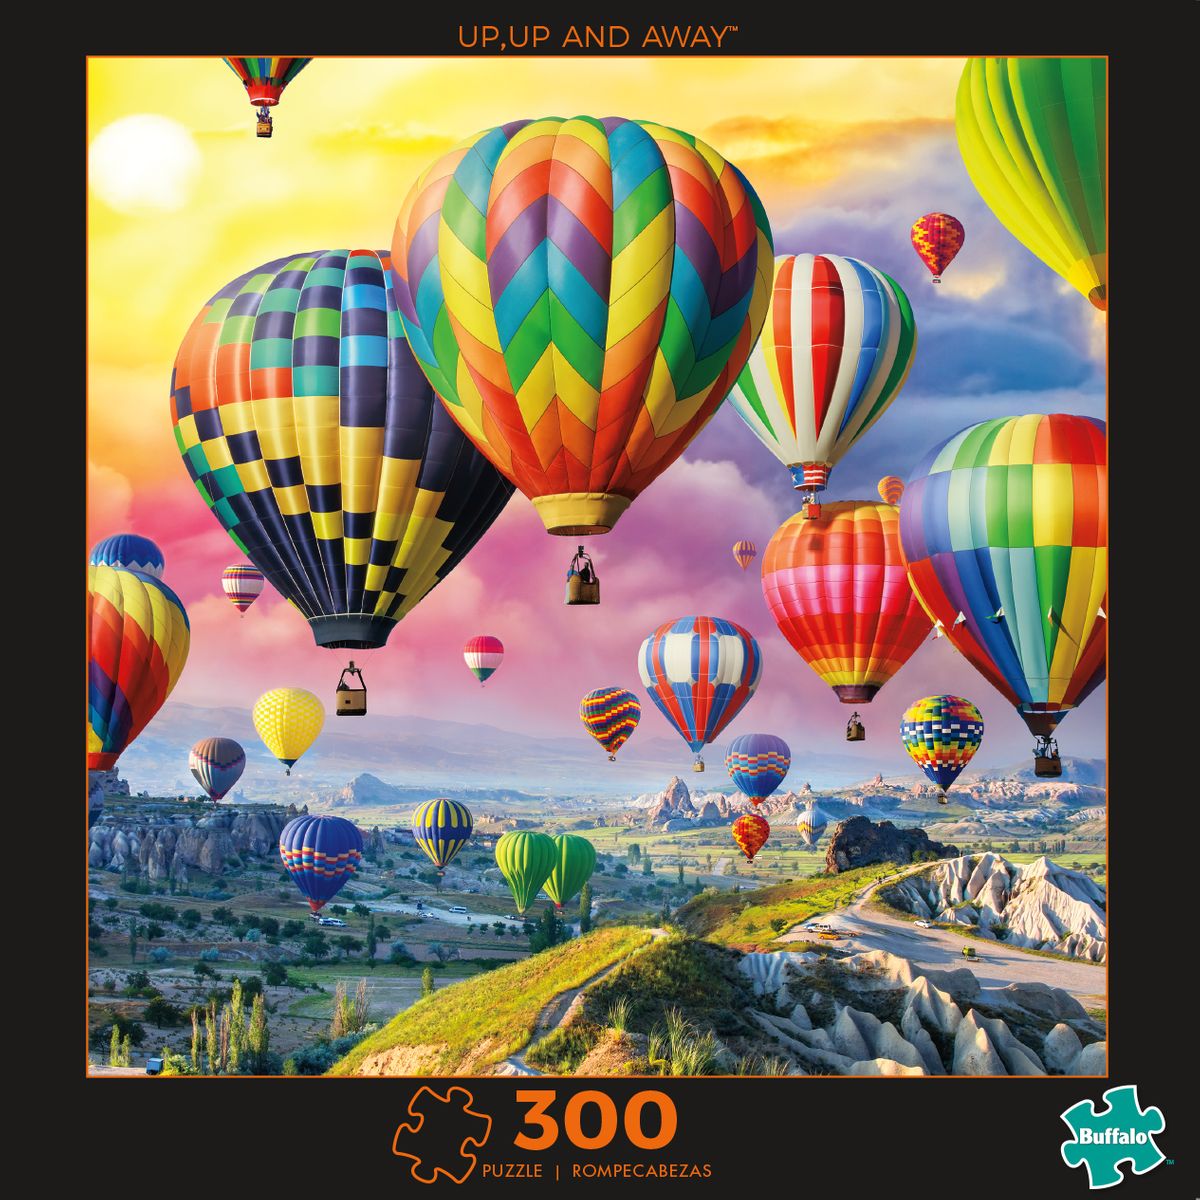 [RDY] [送料無料] Buffalo Games - Photography - Up, Up and Away - 300 Piece Jigsaw Puzzle [楽天海外通販] | Buffalo Games - Photography - Up, Up and Away - 300 Piece Jigsaw Puzzle